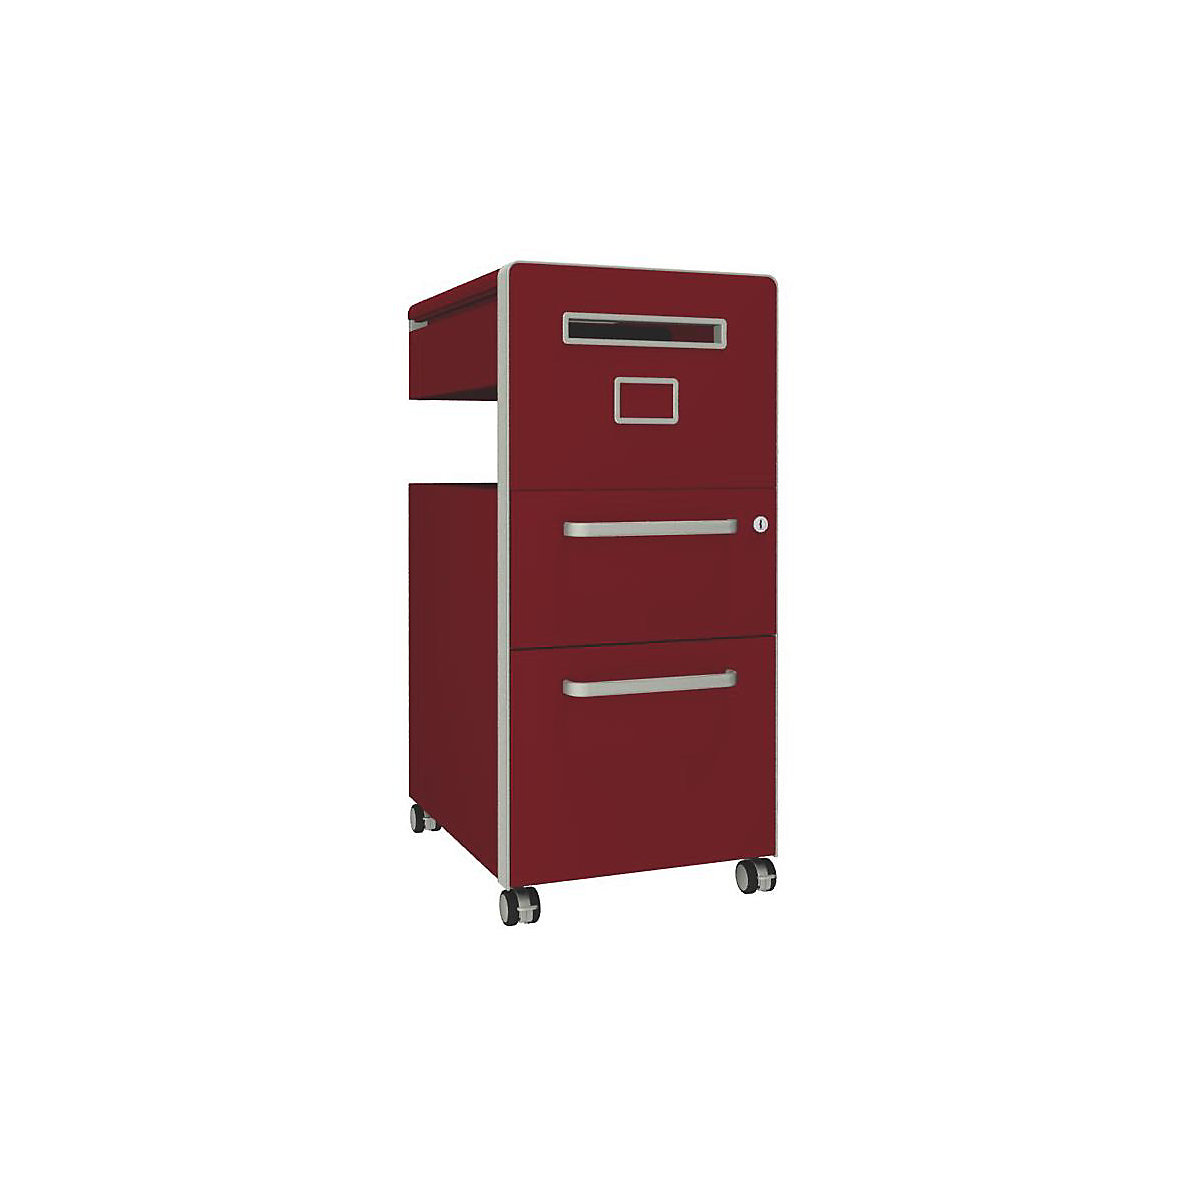 Bite™ pedestal furniture, with 1 whiteboard, opens on the right side – BISLEY, with 1 universal drawer, 1 suspension file drawer, cardinal red-32